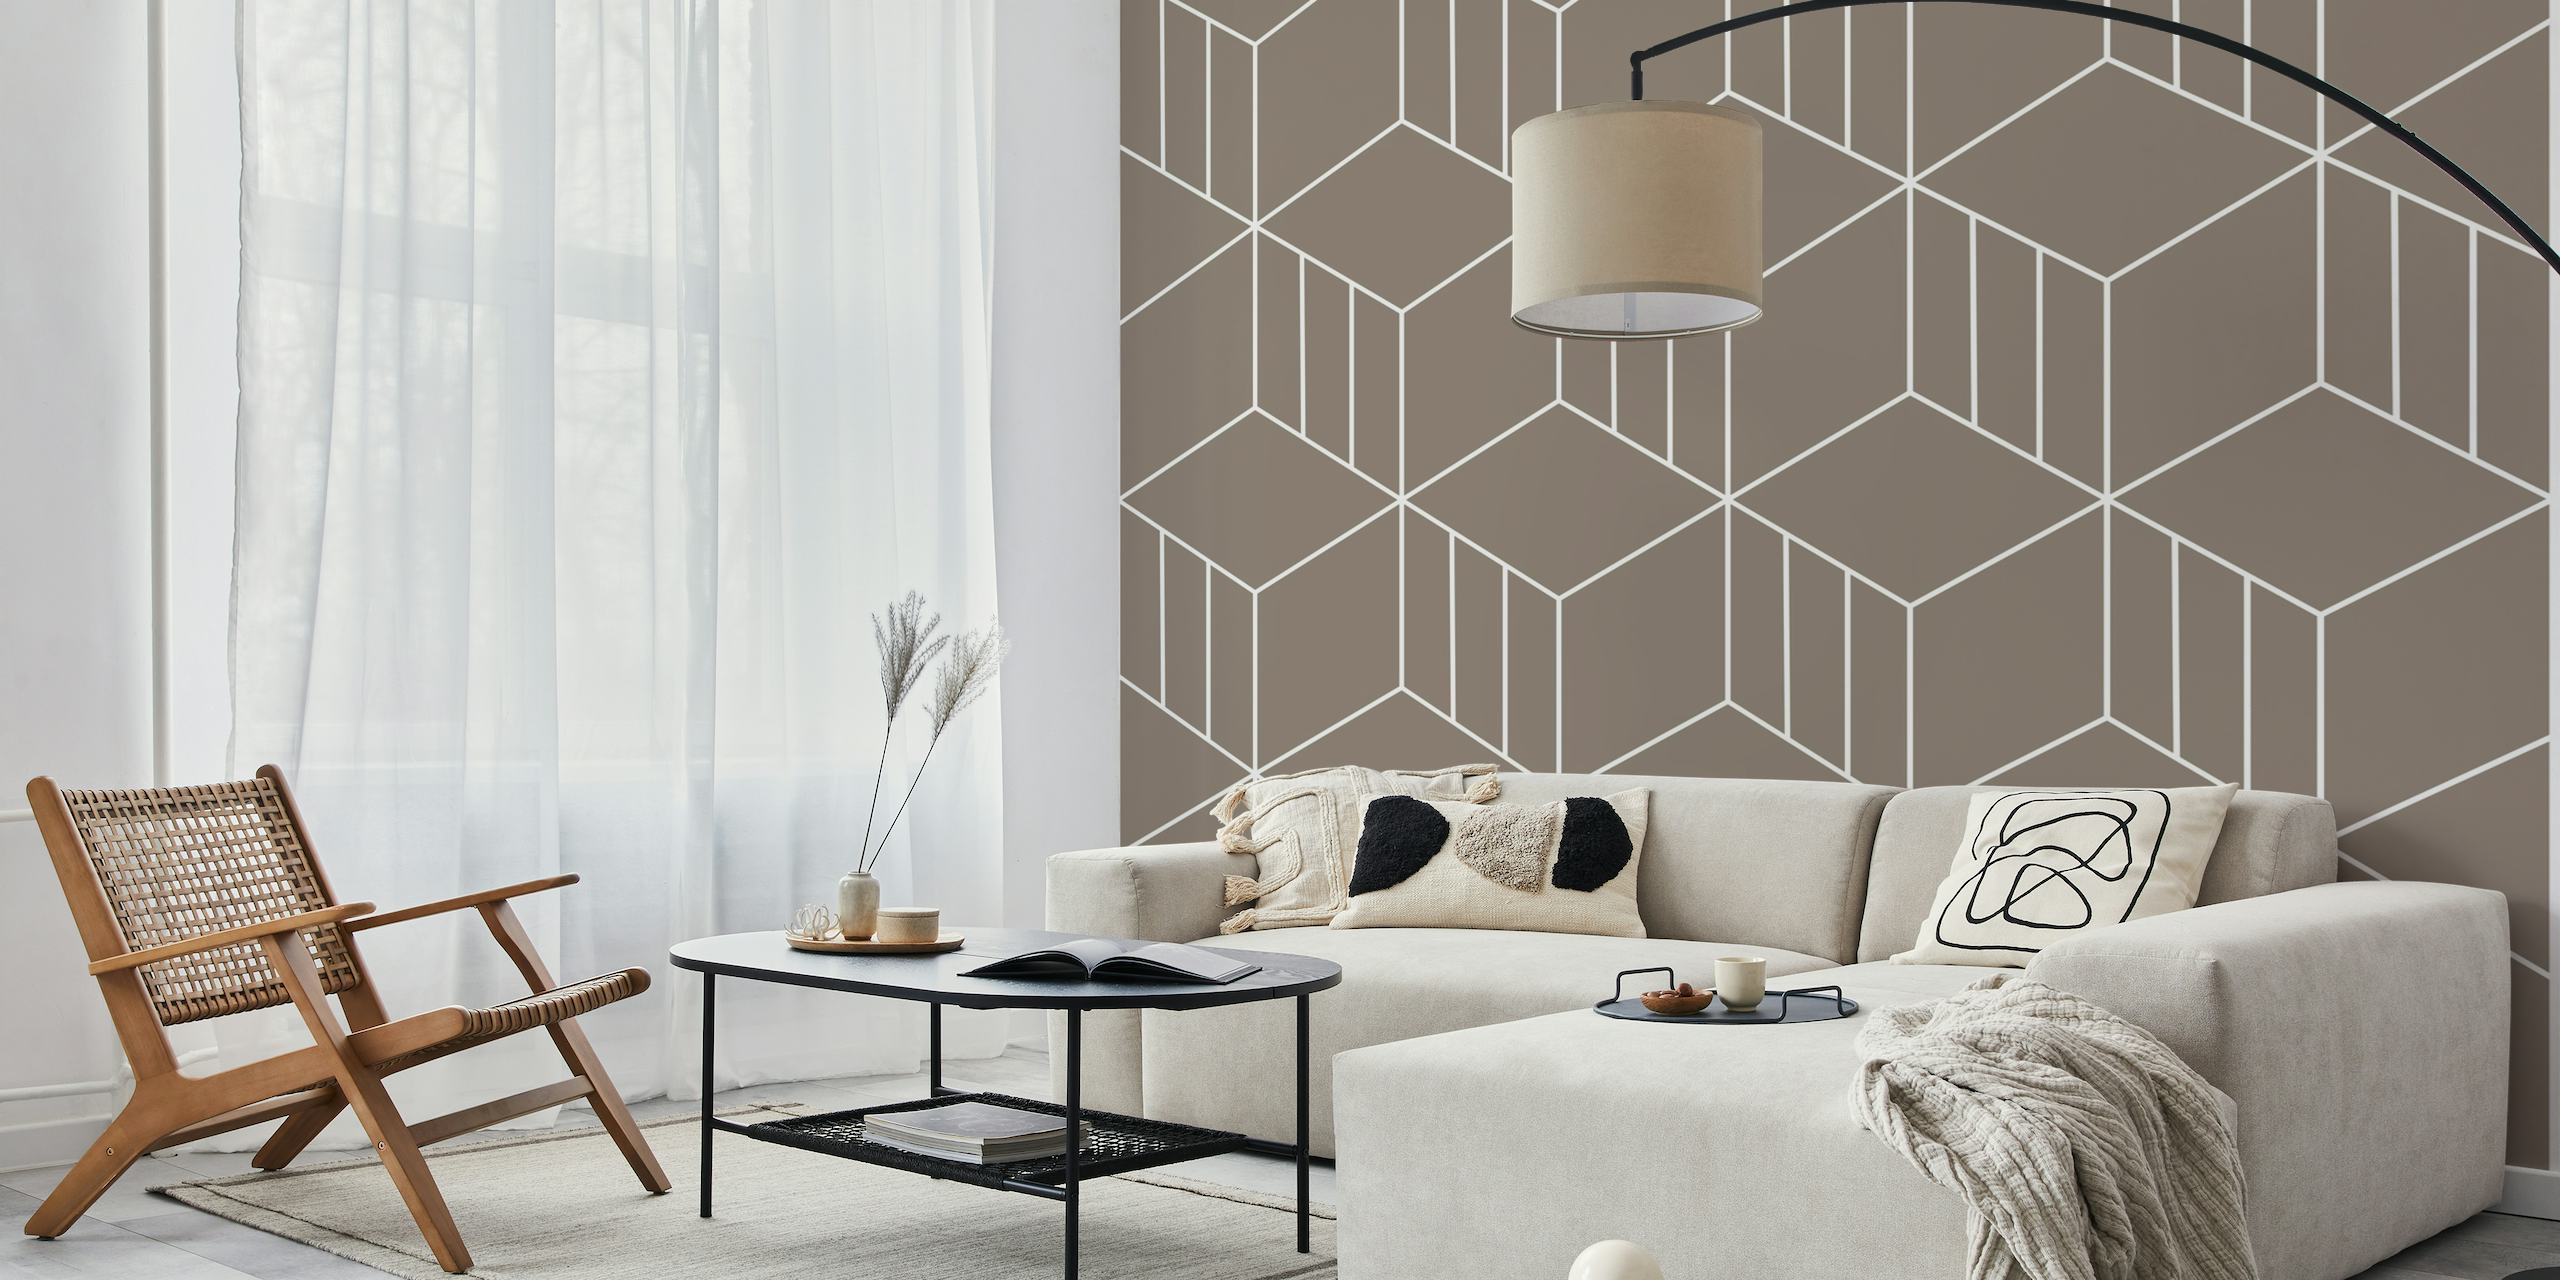 3D effect geometric cubes wall mural in shades of latte and taupe